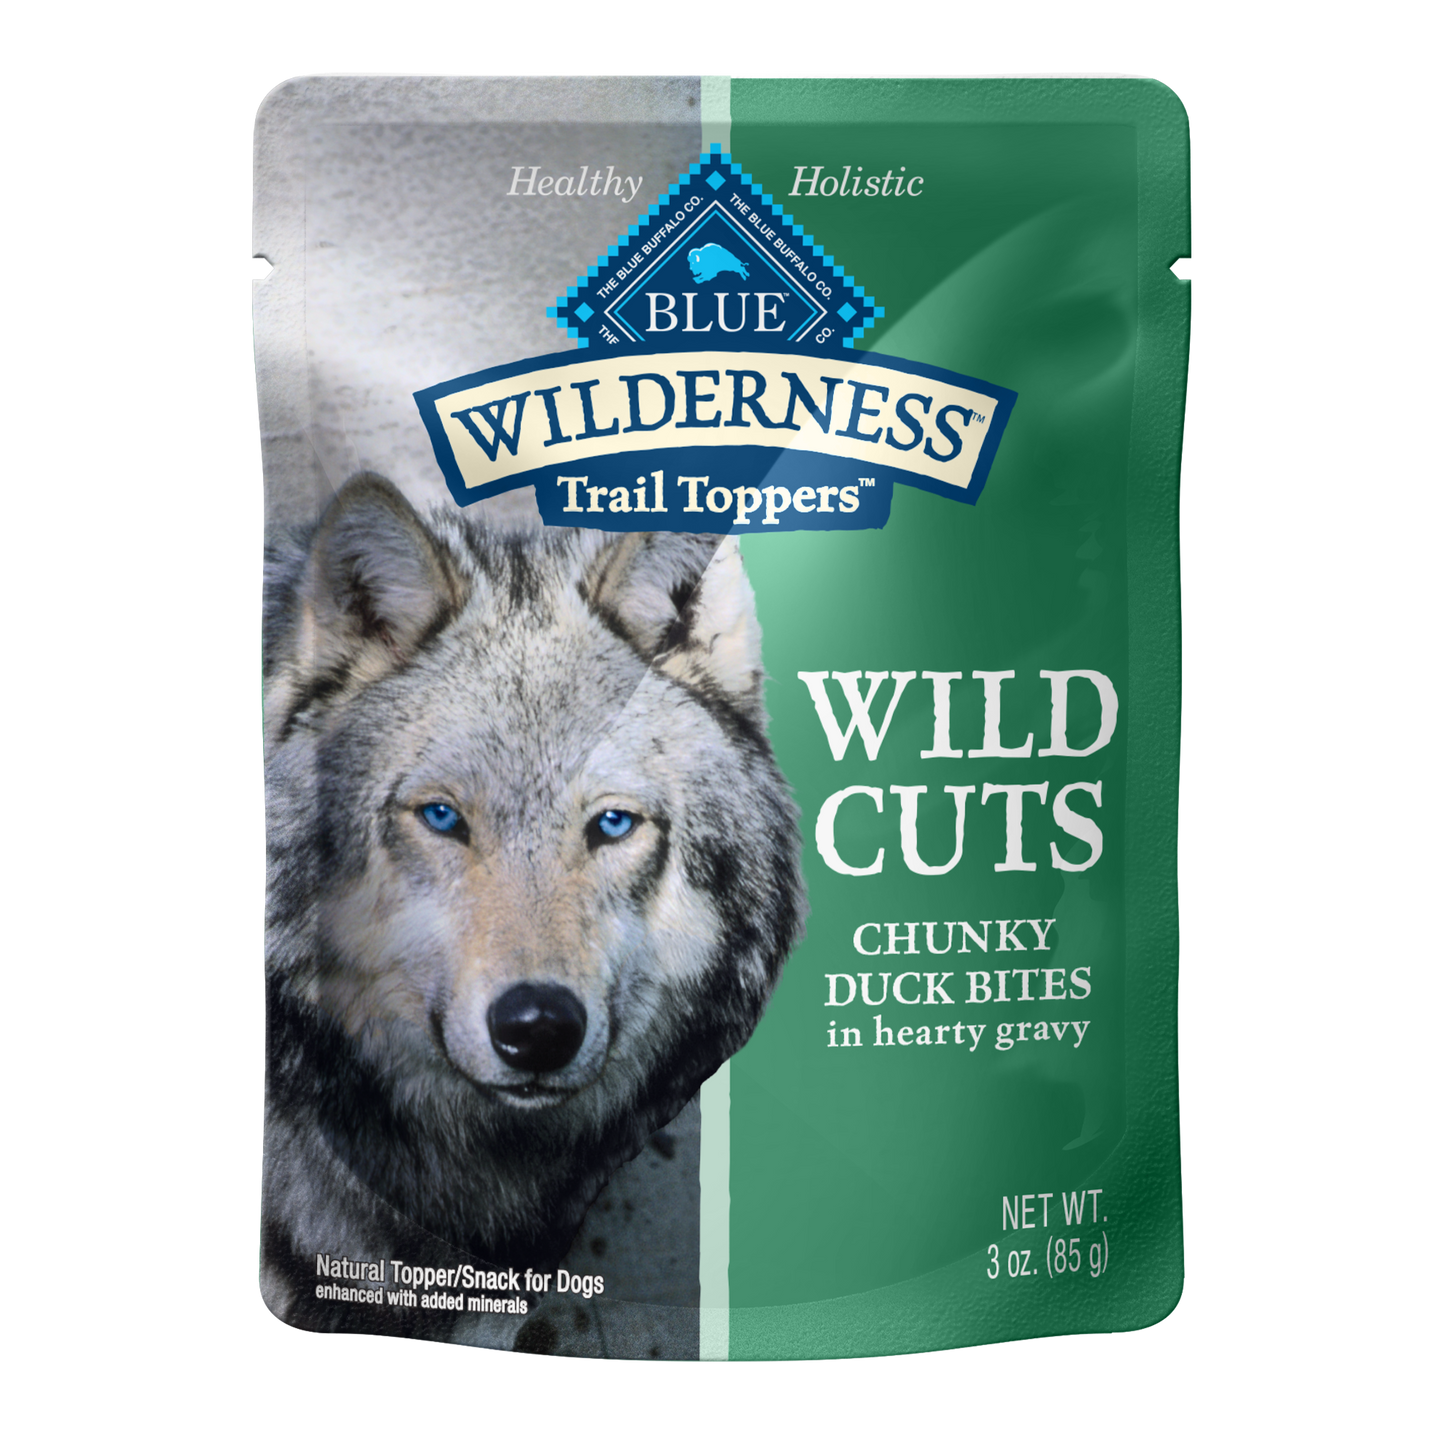 Blue Buffalo Wilderness Trail Toppers Wild Cuts High Protein, Natural Wet Dog Food, Chunky Duck Bites in Hearty Gravy 3-oz pouches, Case of 24